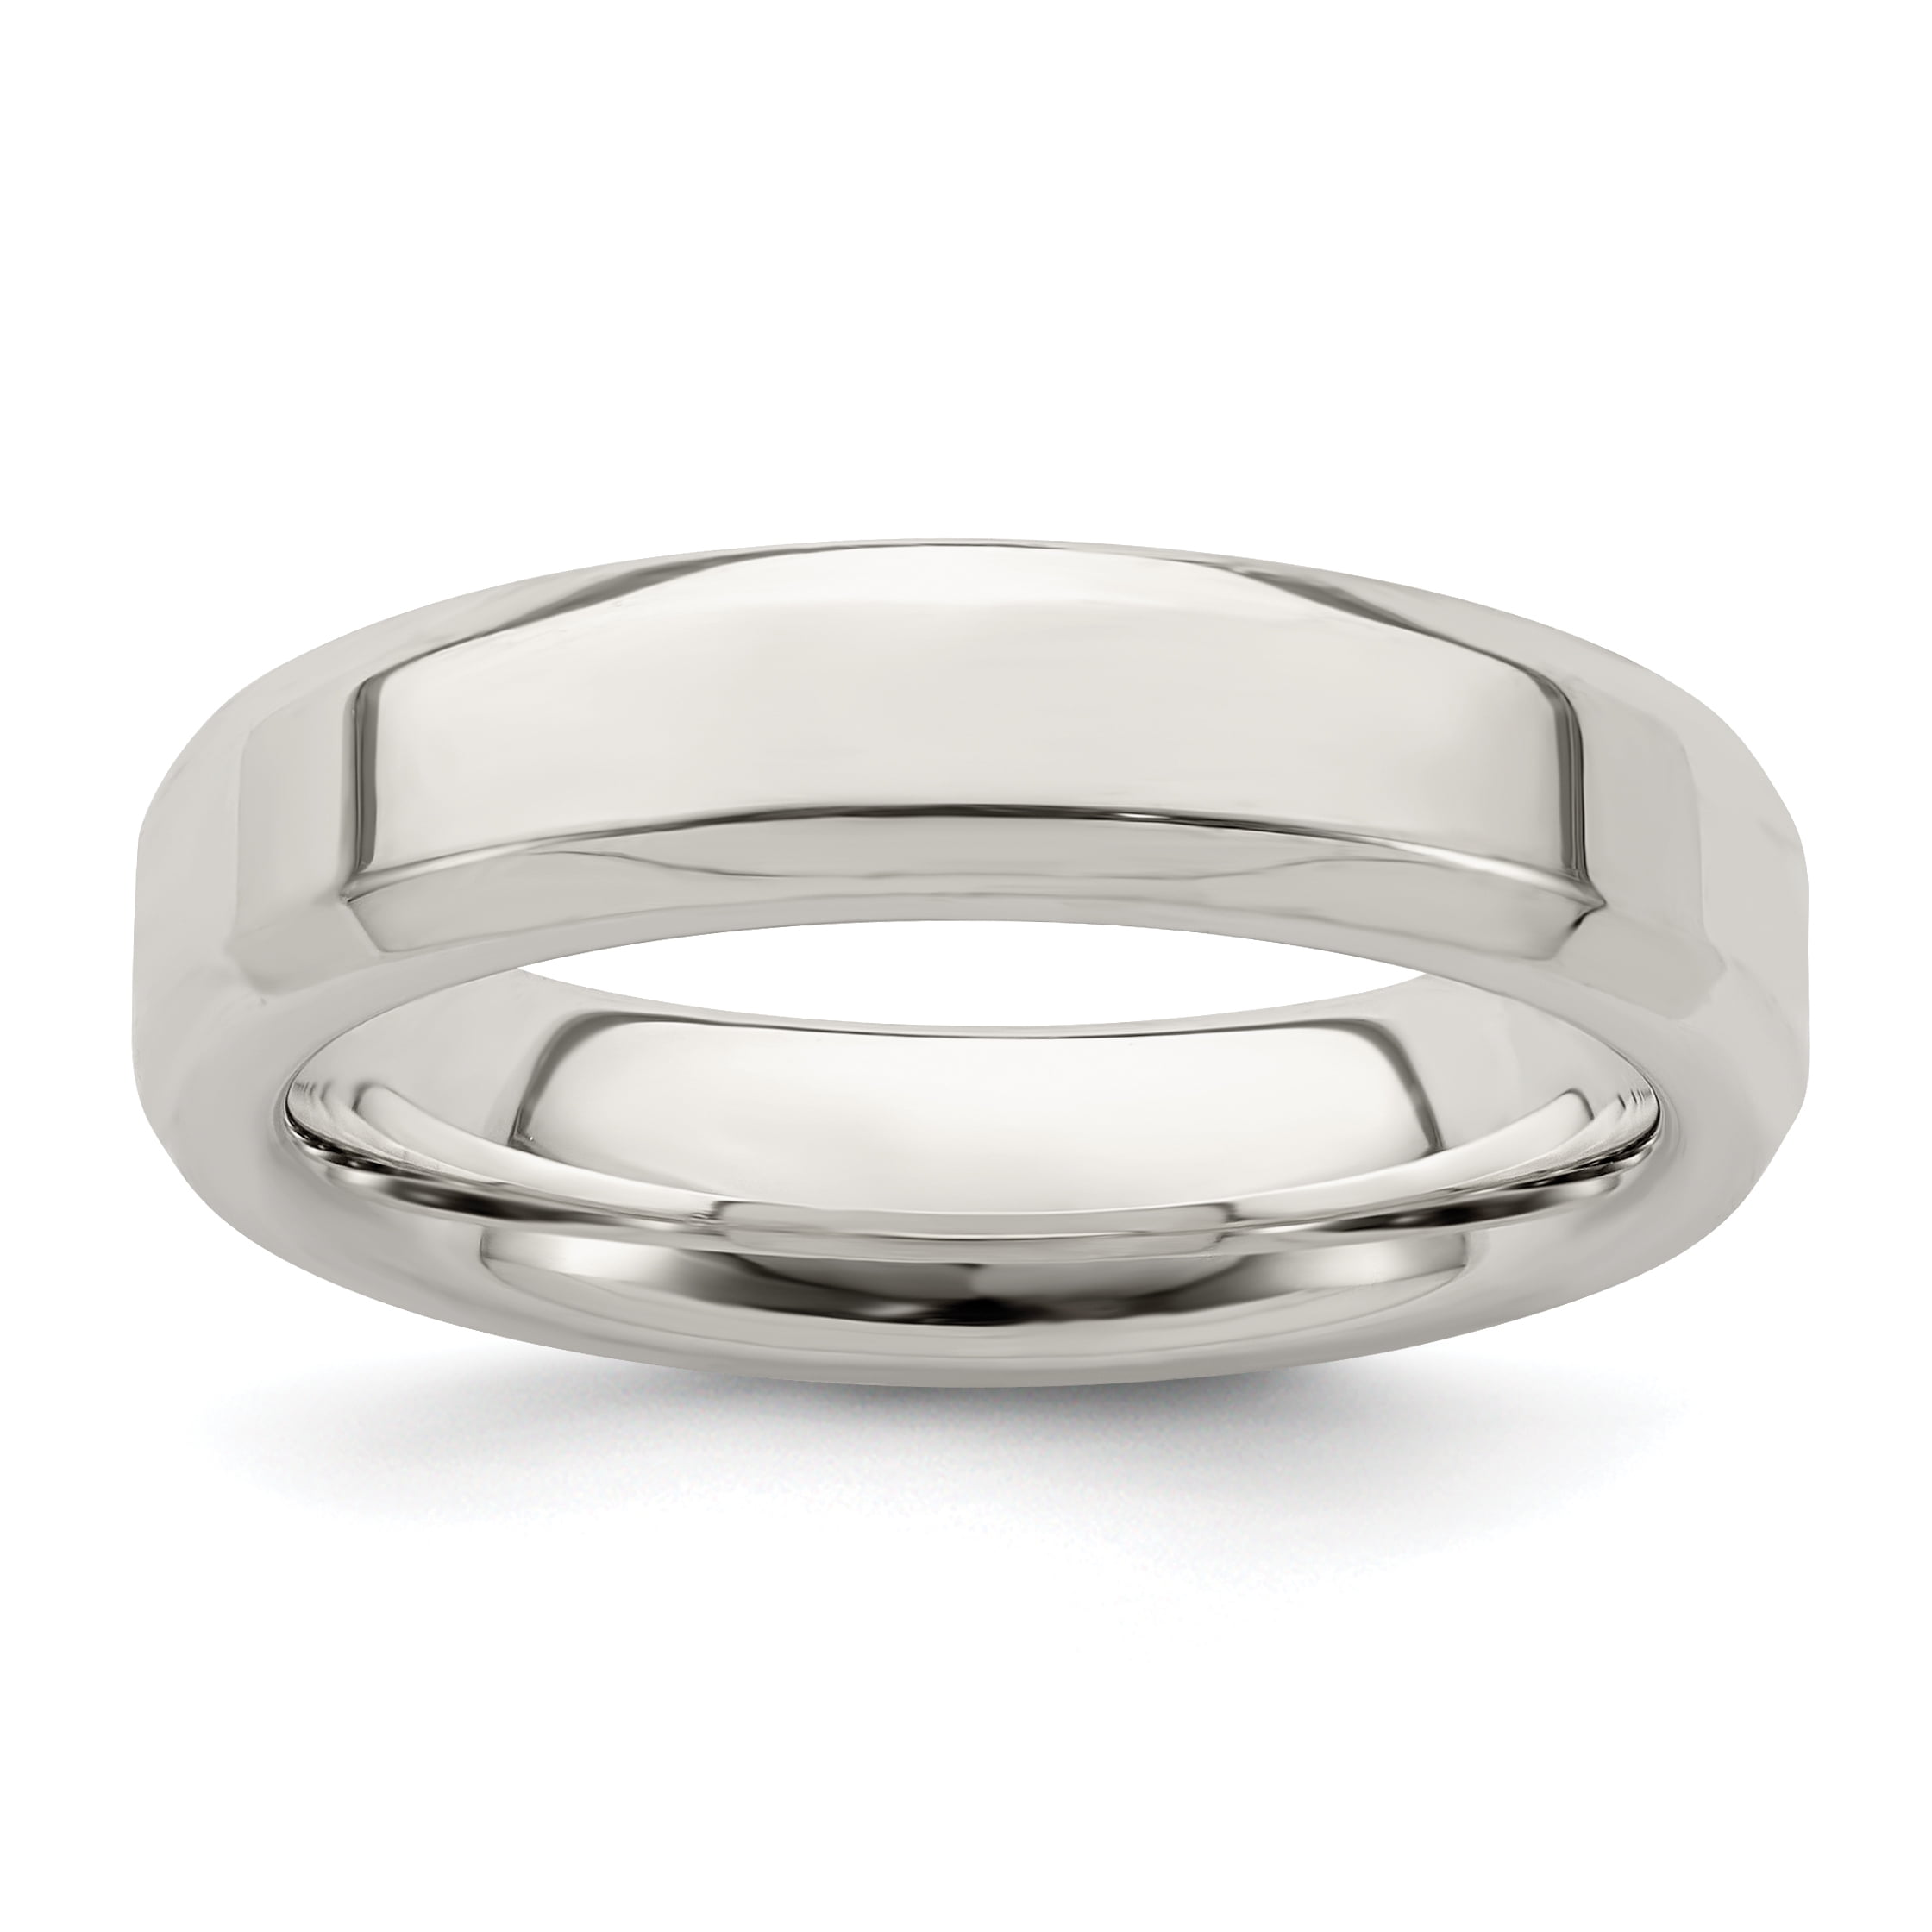 Sterling Silver 4mm Bevel Edge Band 